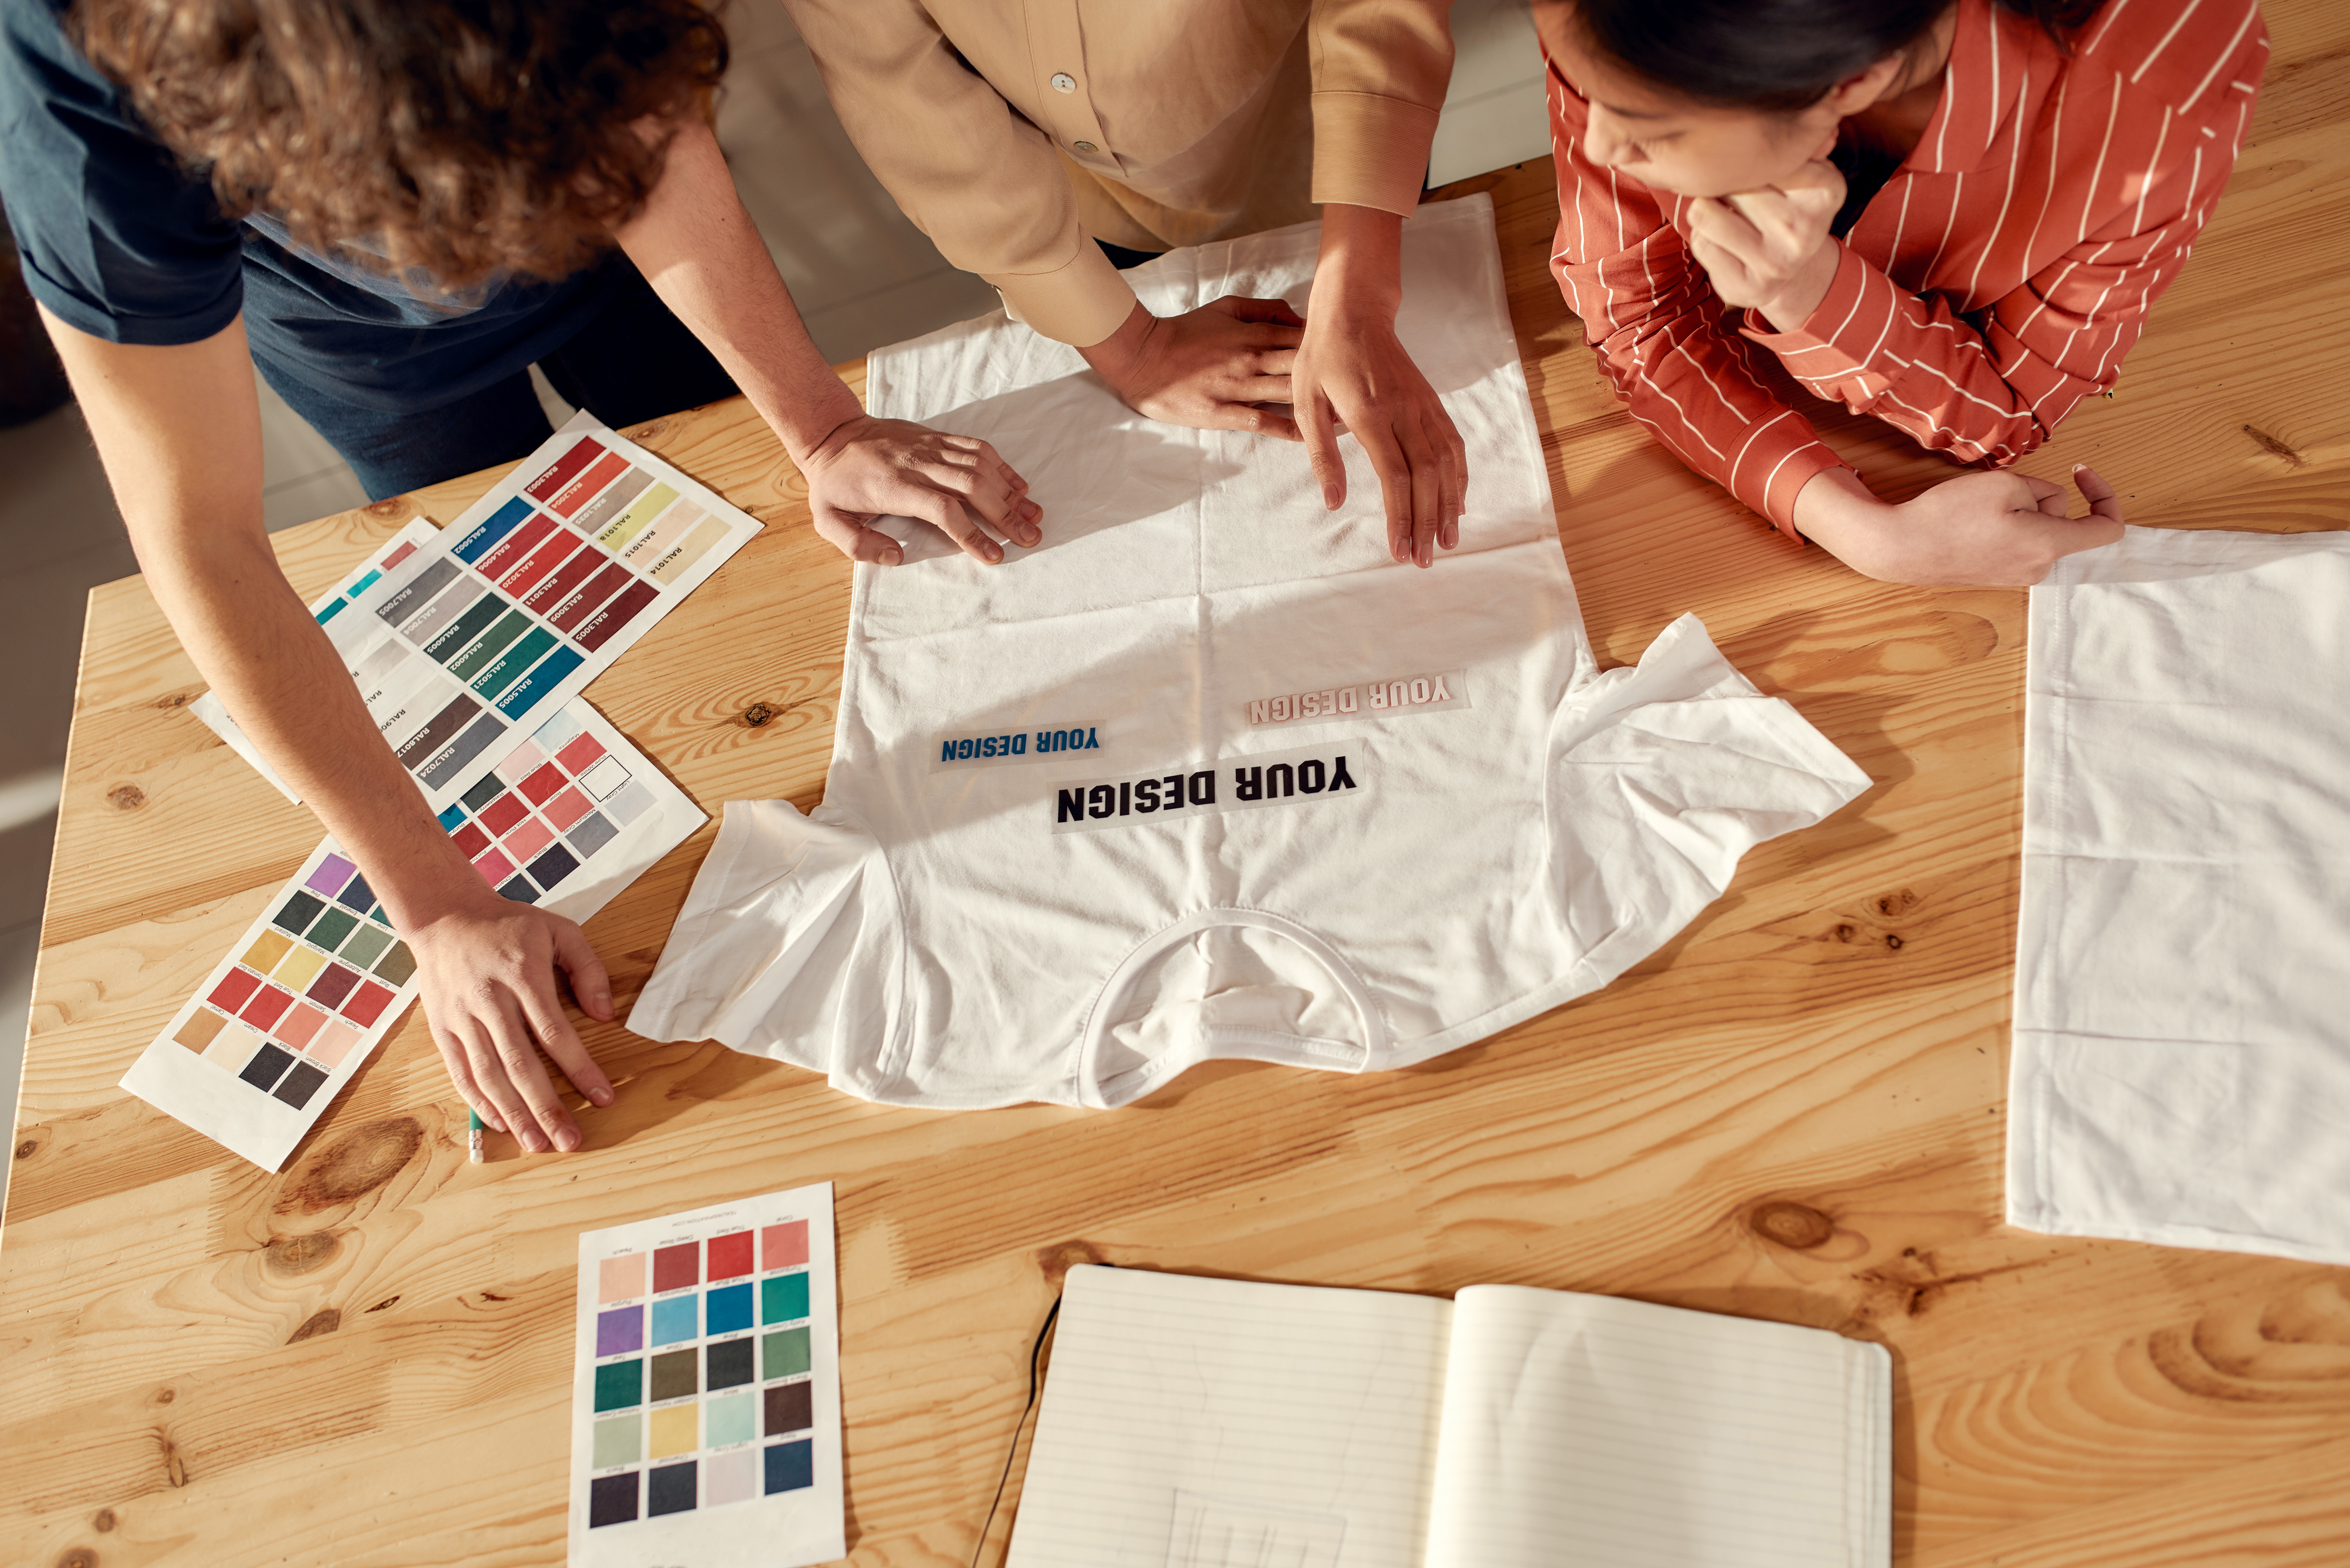 How a Business's Visual Identity Can Boost Customers and Sales